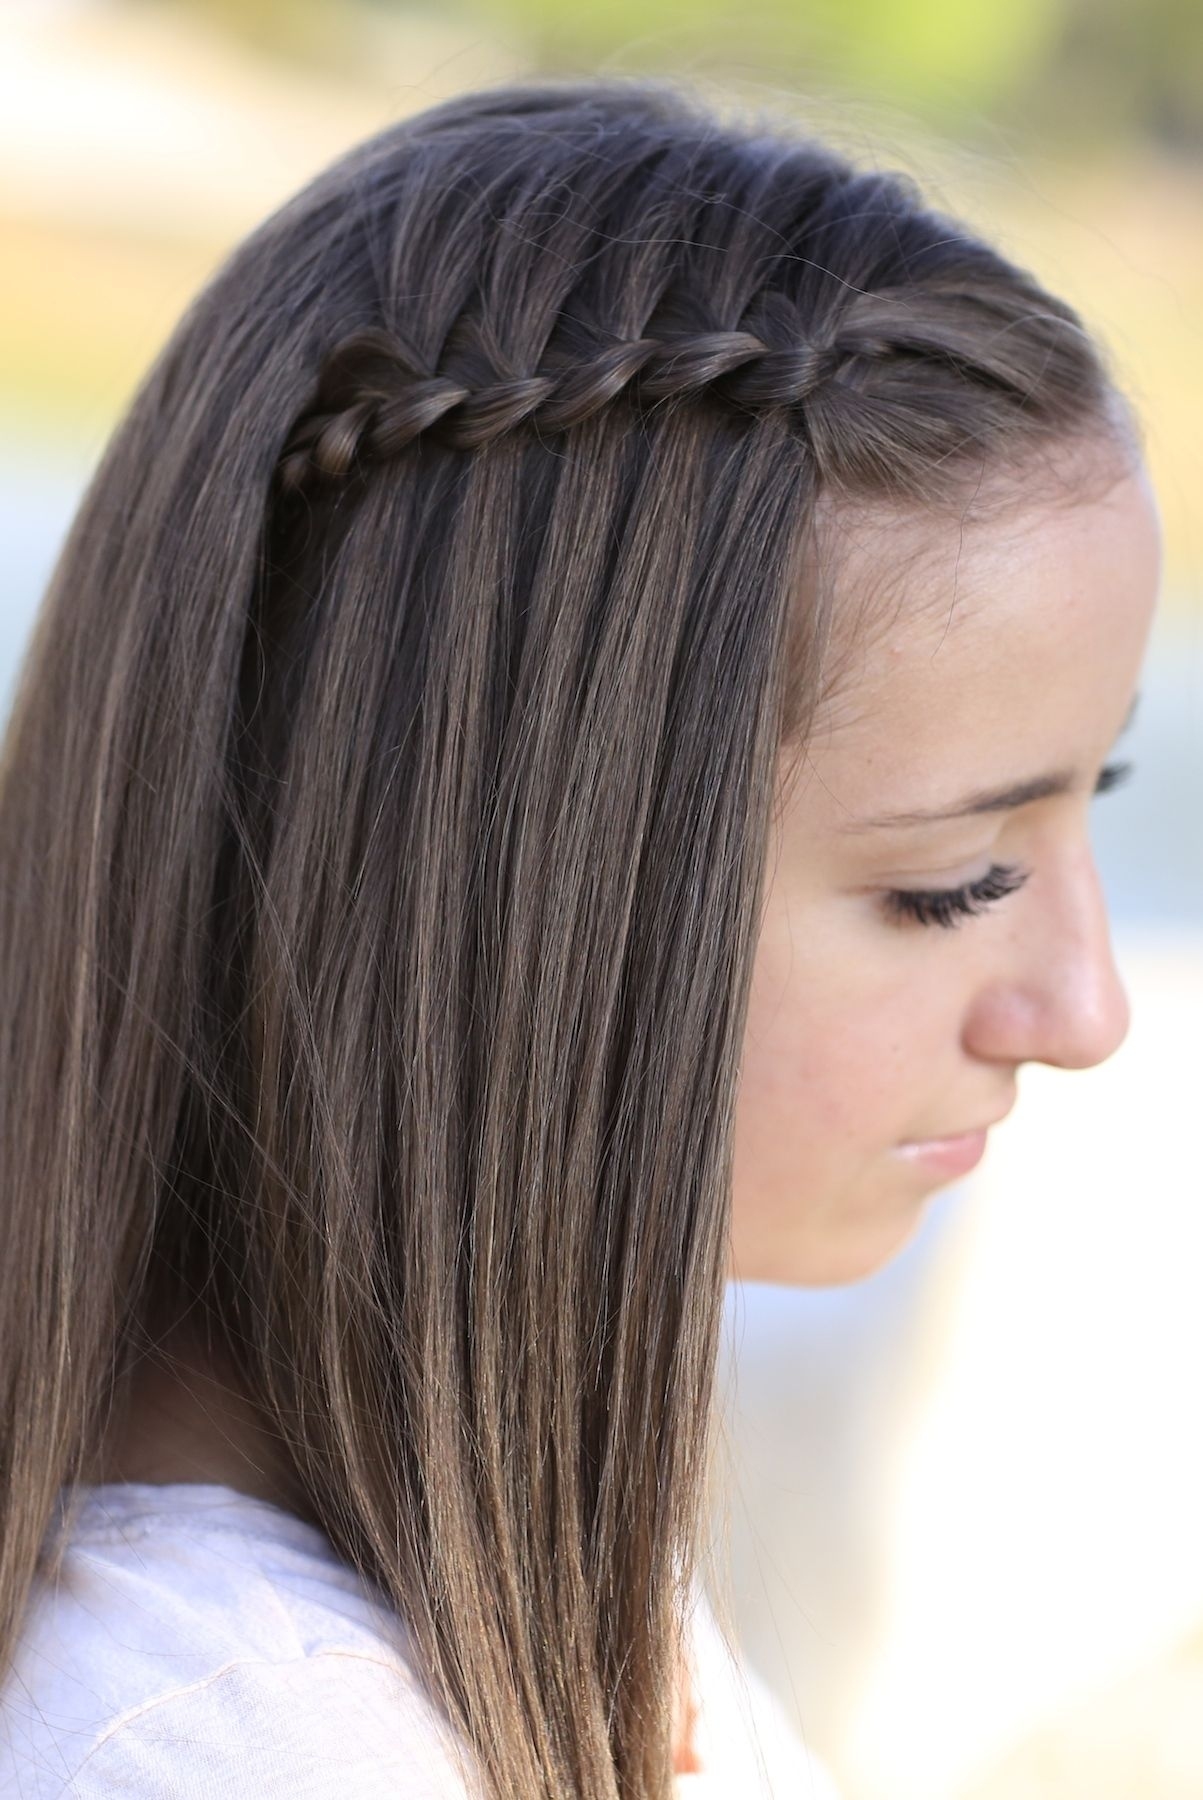 Pin On Hair Styles in Hairstyles For 9 Years Old